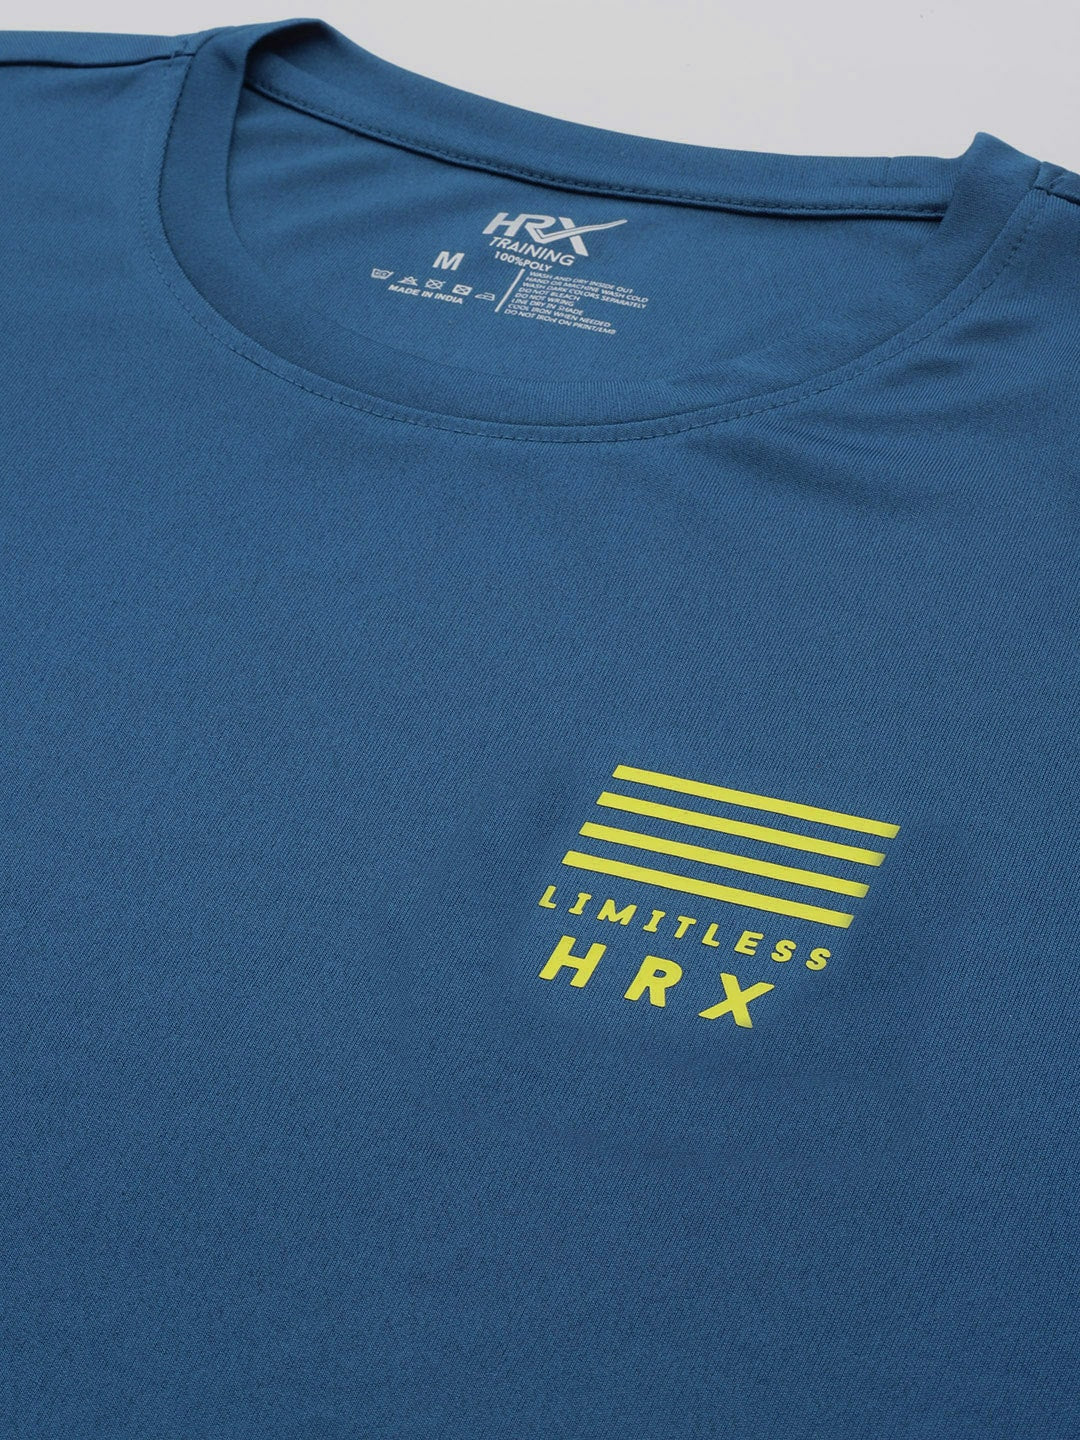 Buy HRX by Hrithik Roshan Printed Rapid-Dry Training or Gym T-shirt Online  at Best Price